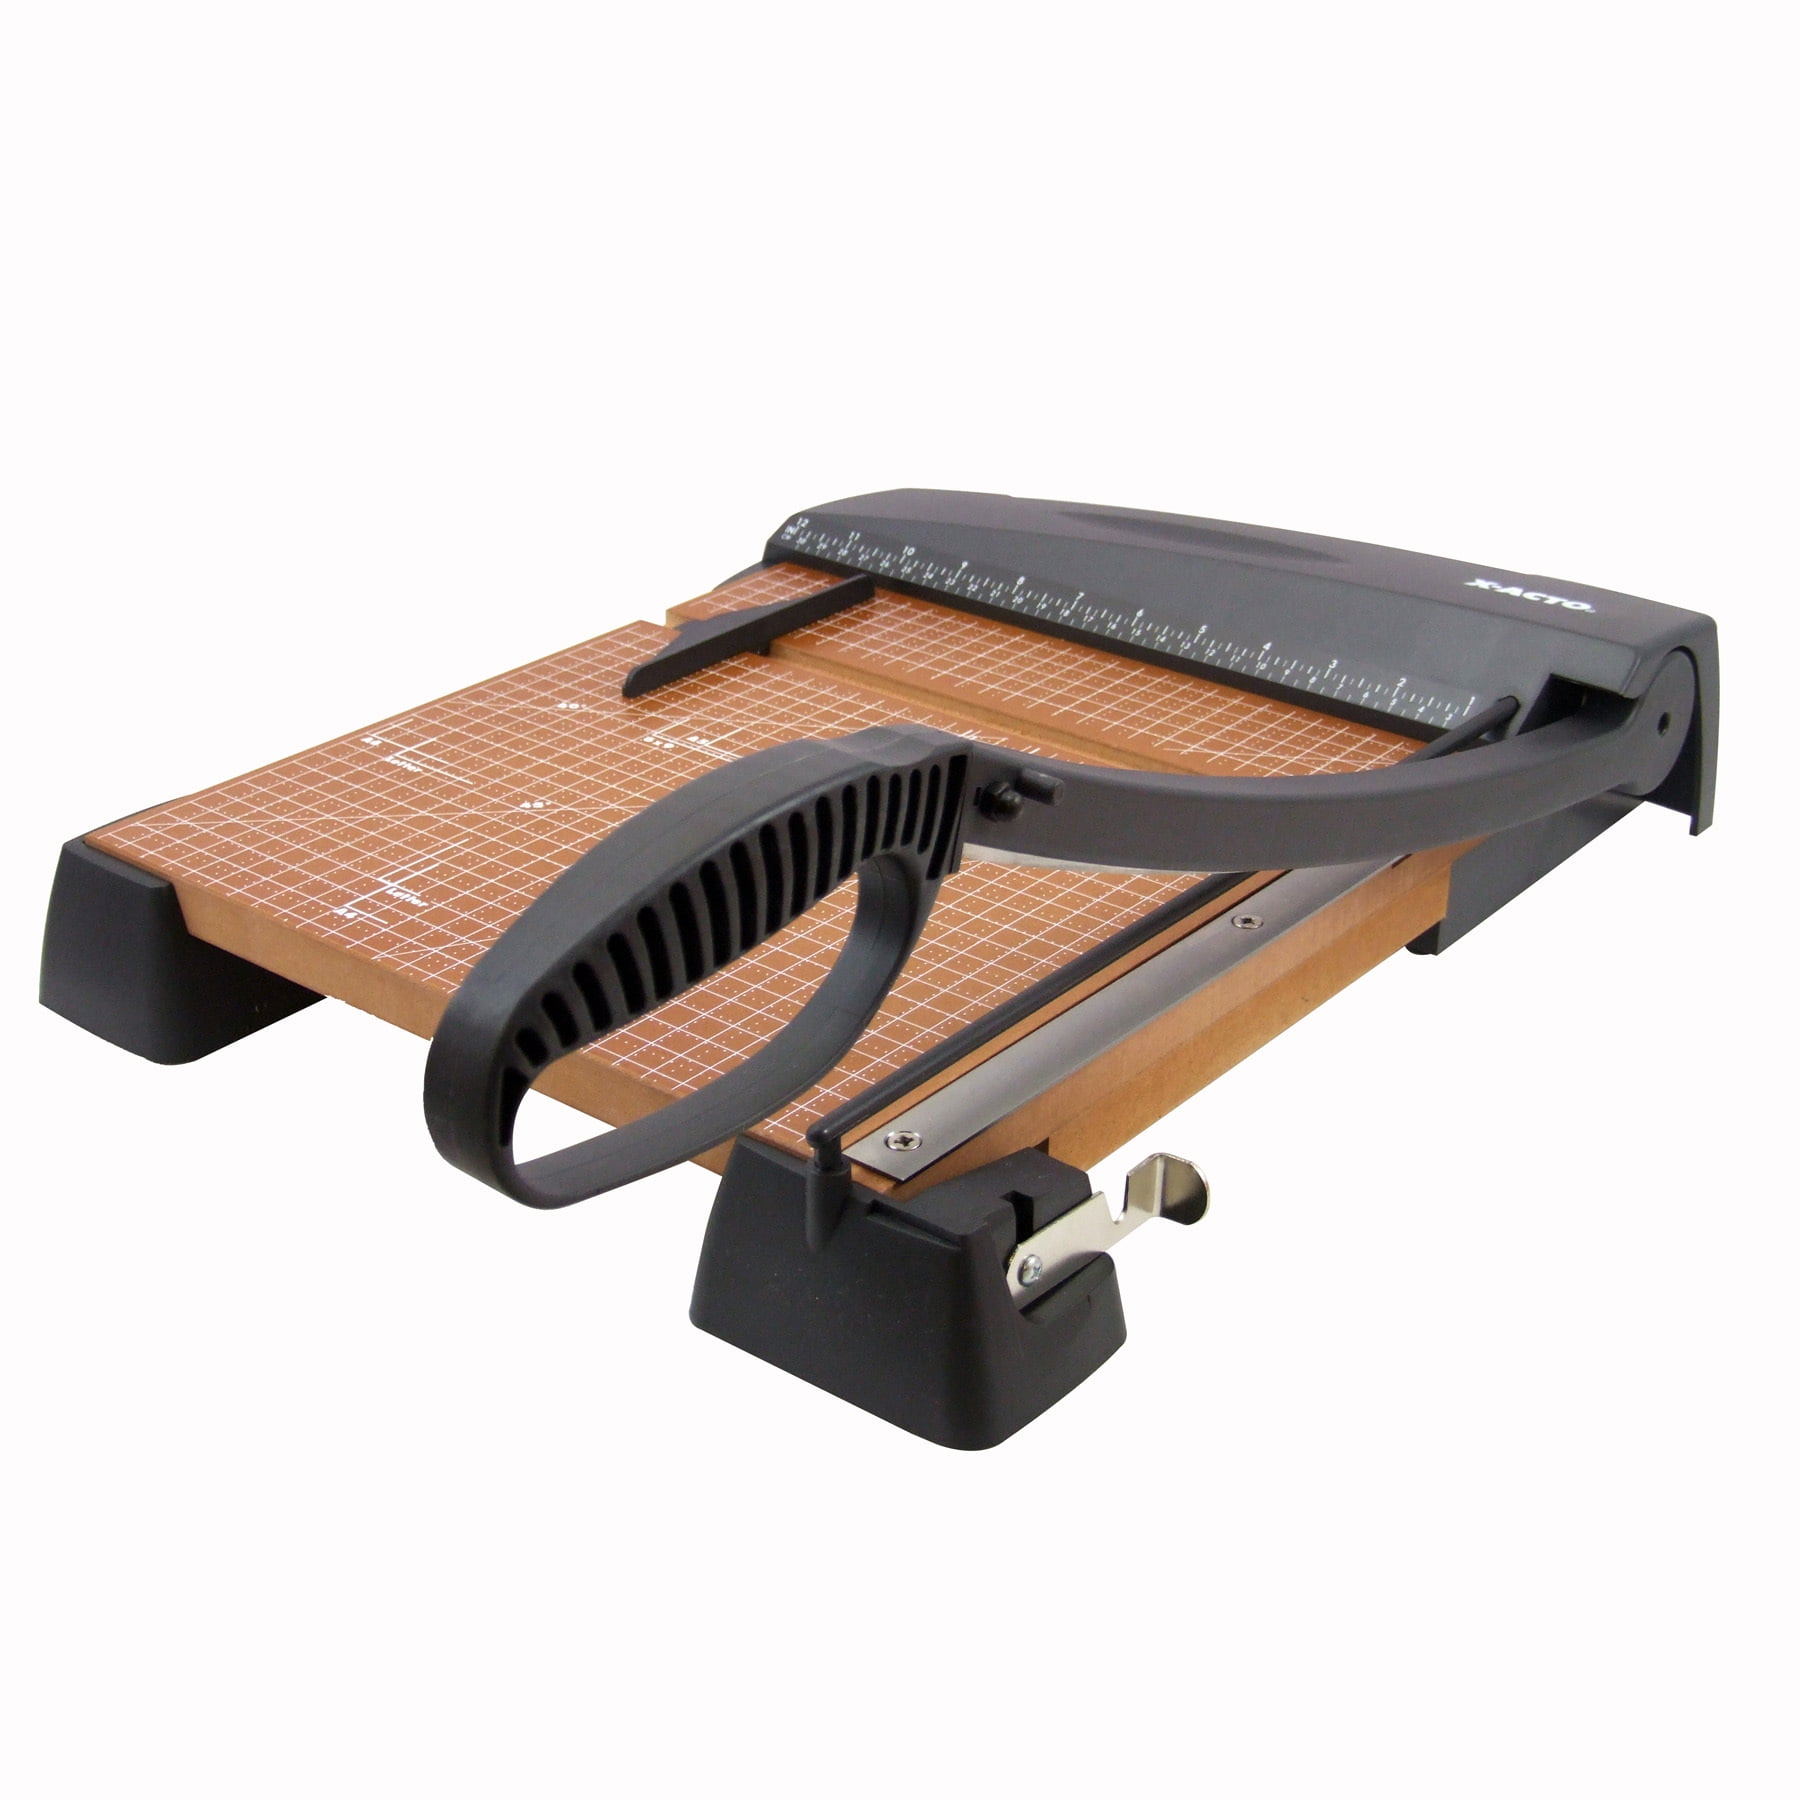 Buy X-Acto 12 Heavy Duty Wood Guillotine Paper Cutter - 26312